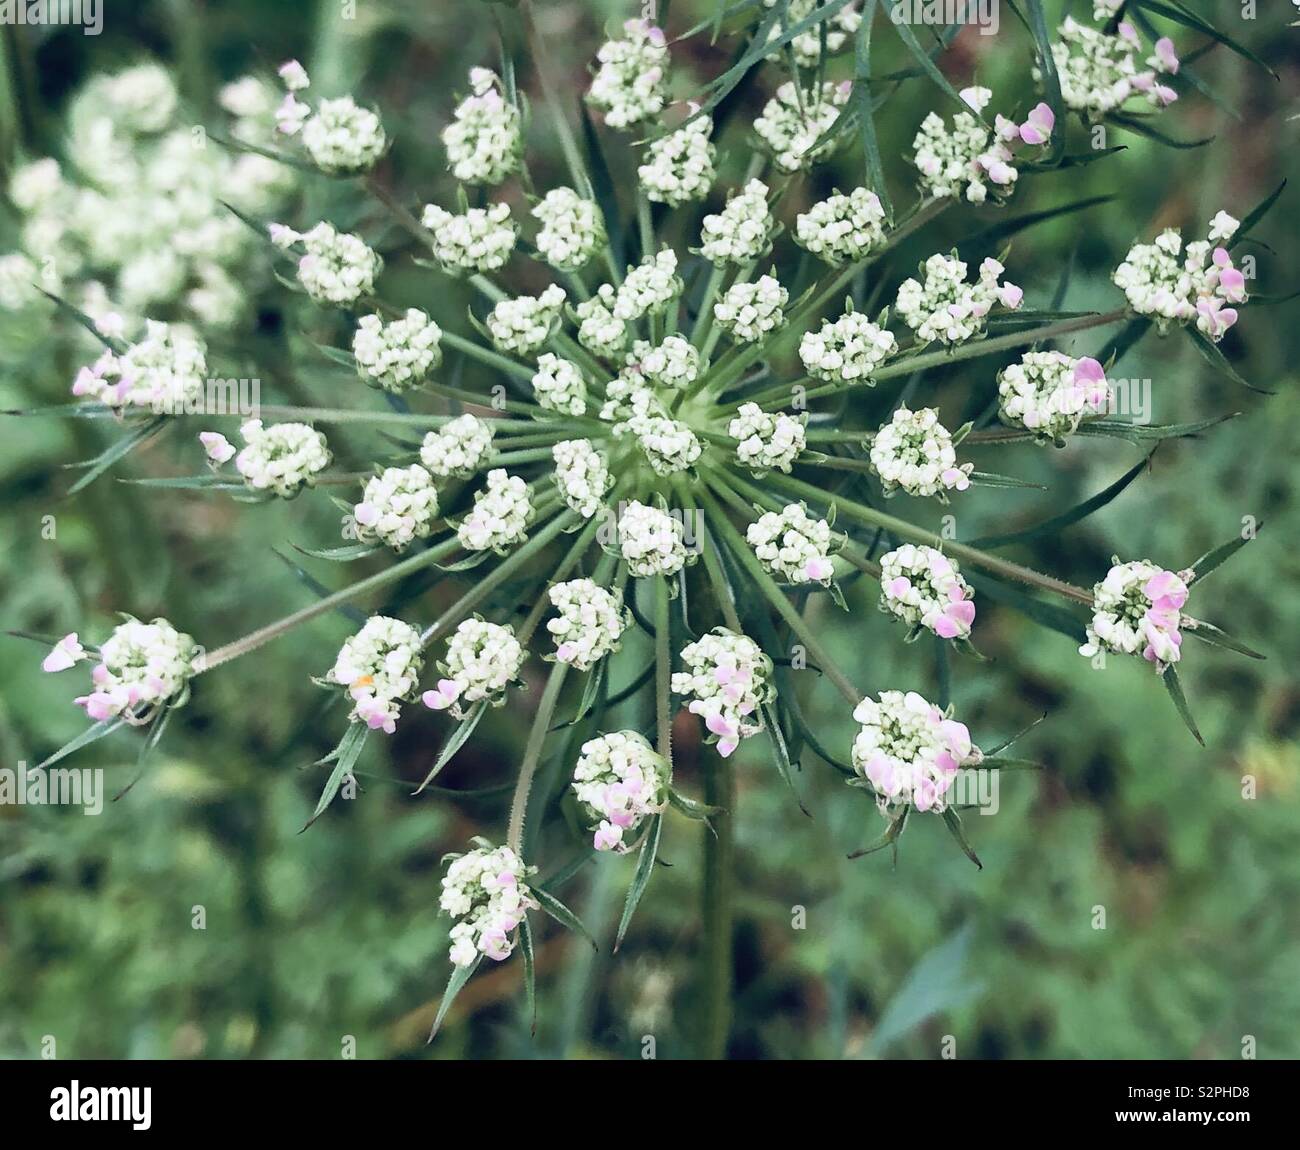 Queen Anne’s Lace flower detail Stock Photo